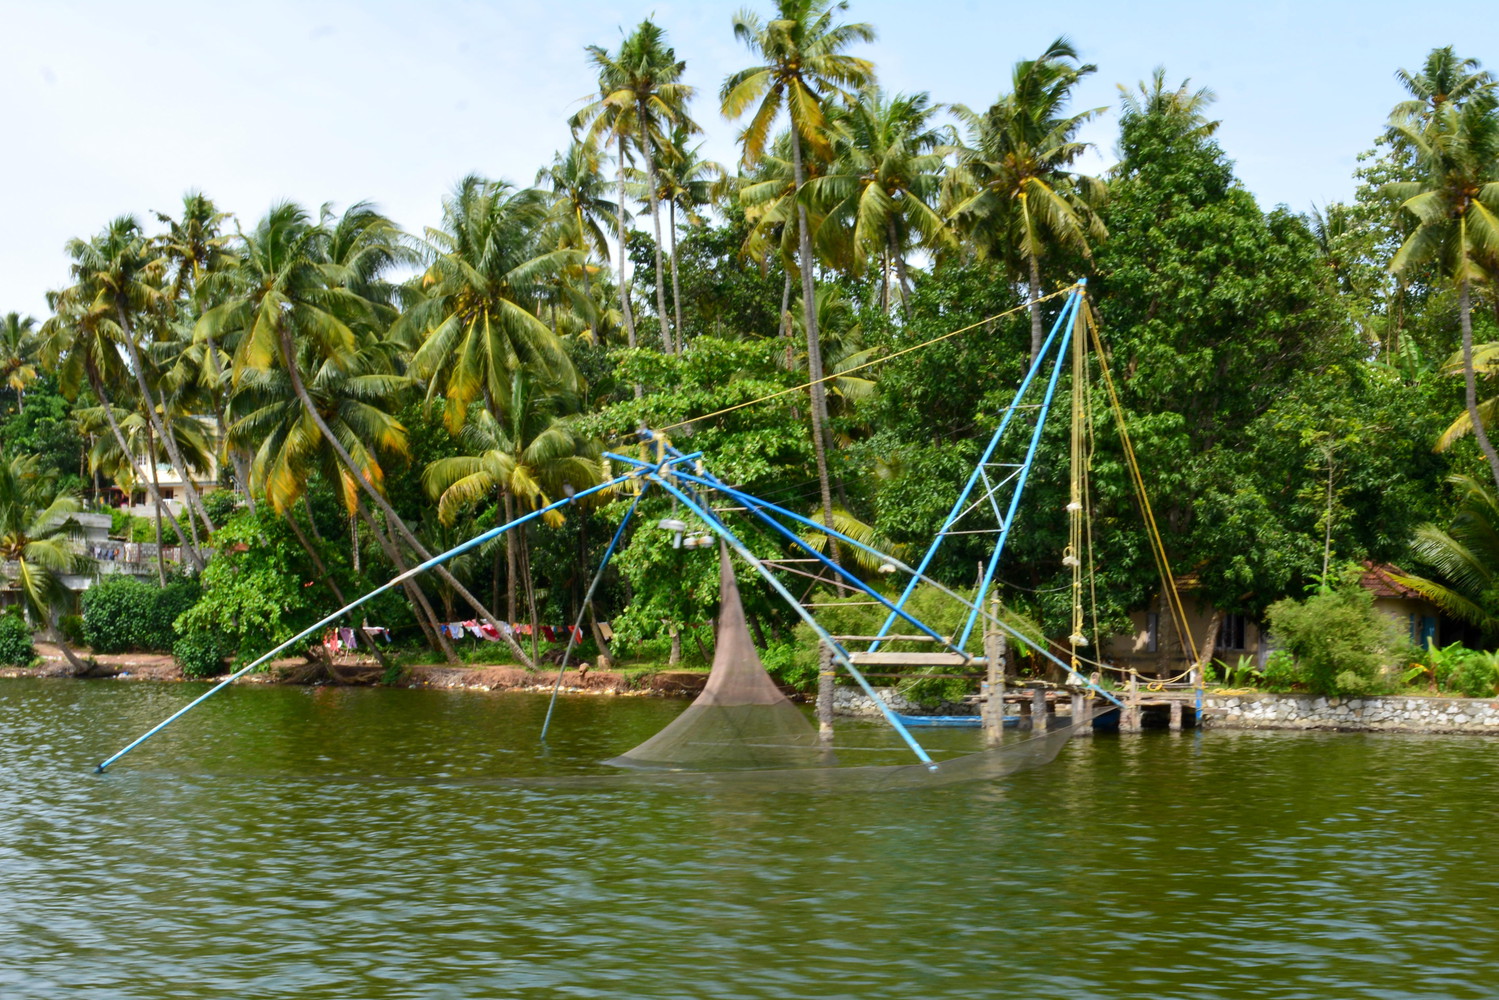 A Chinese fishing net in a lake surrounded by coconut palm trees